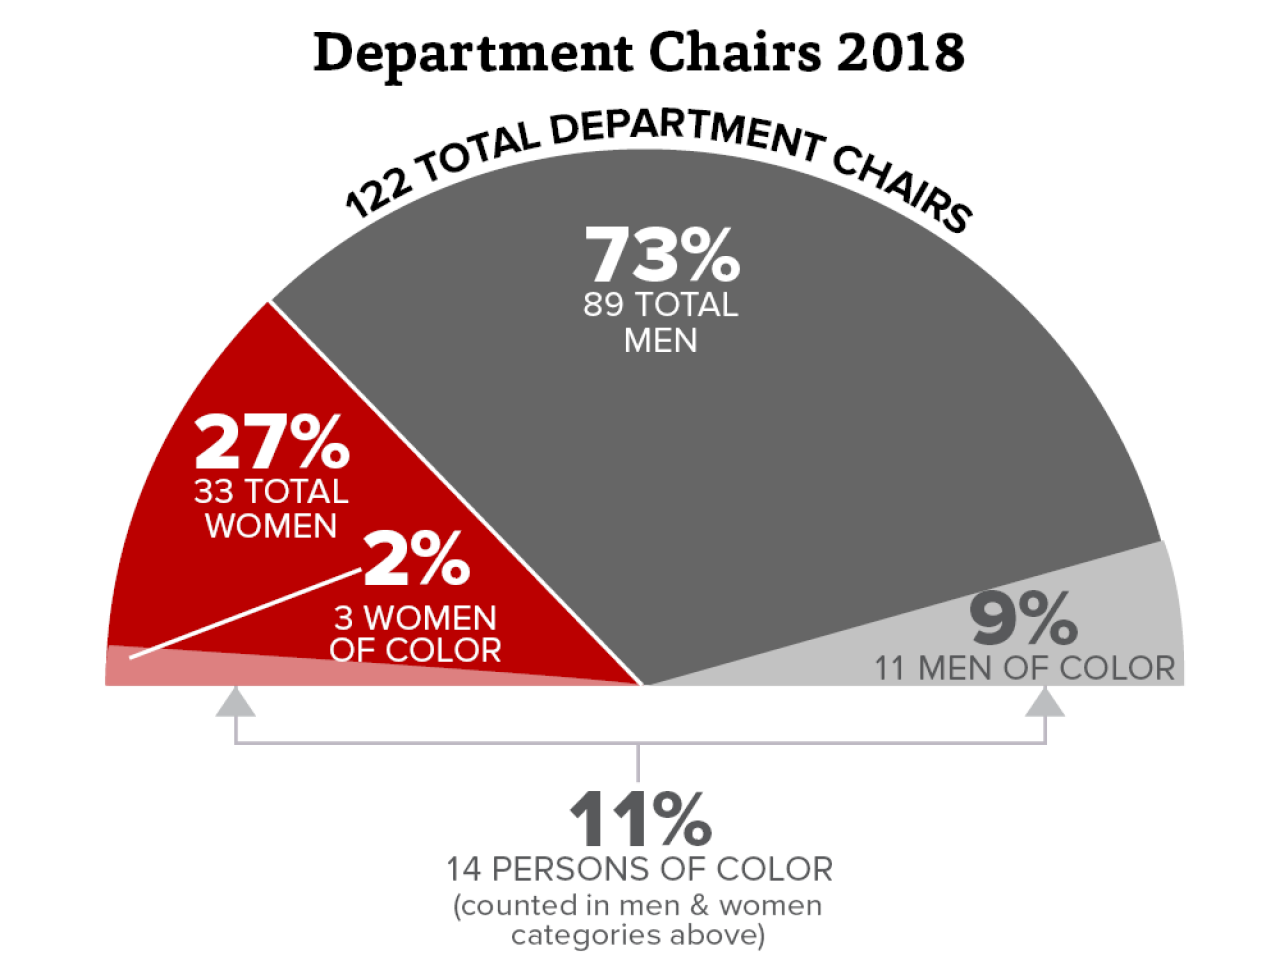 Department Chairs 2018 graphic